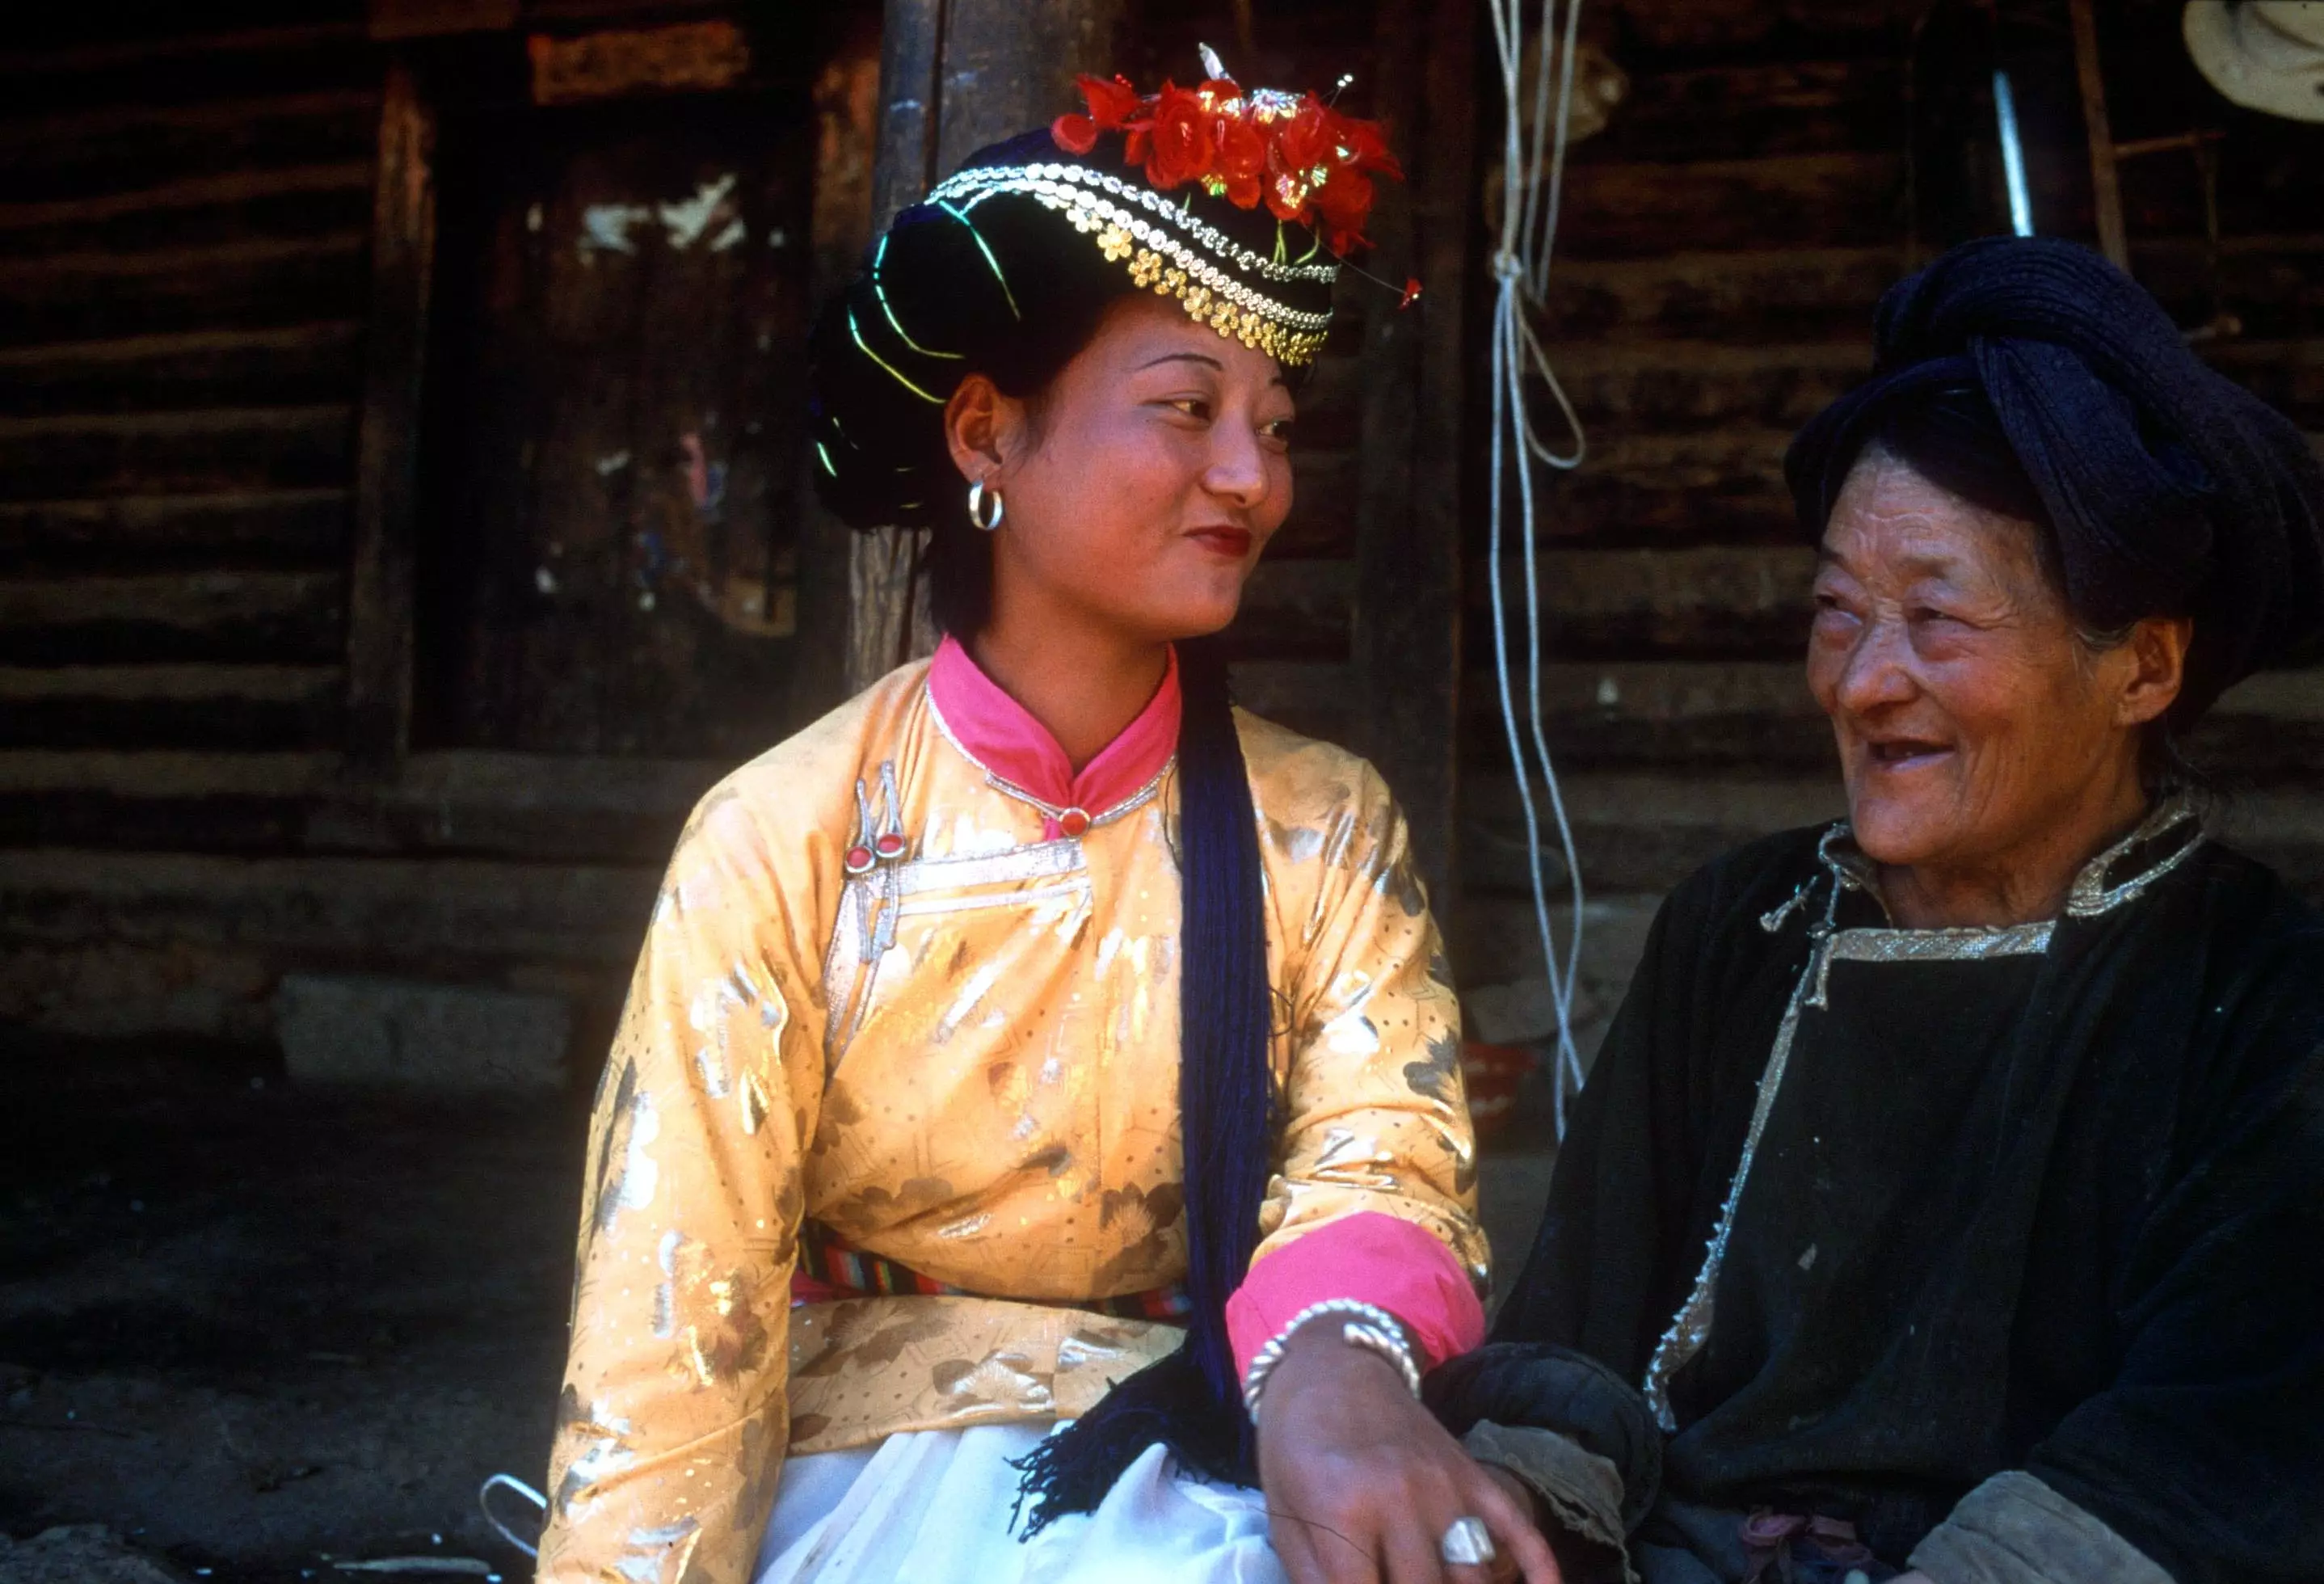 In the matrilineal Mosuo culture, grandmothers are the head of the household (